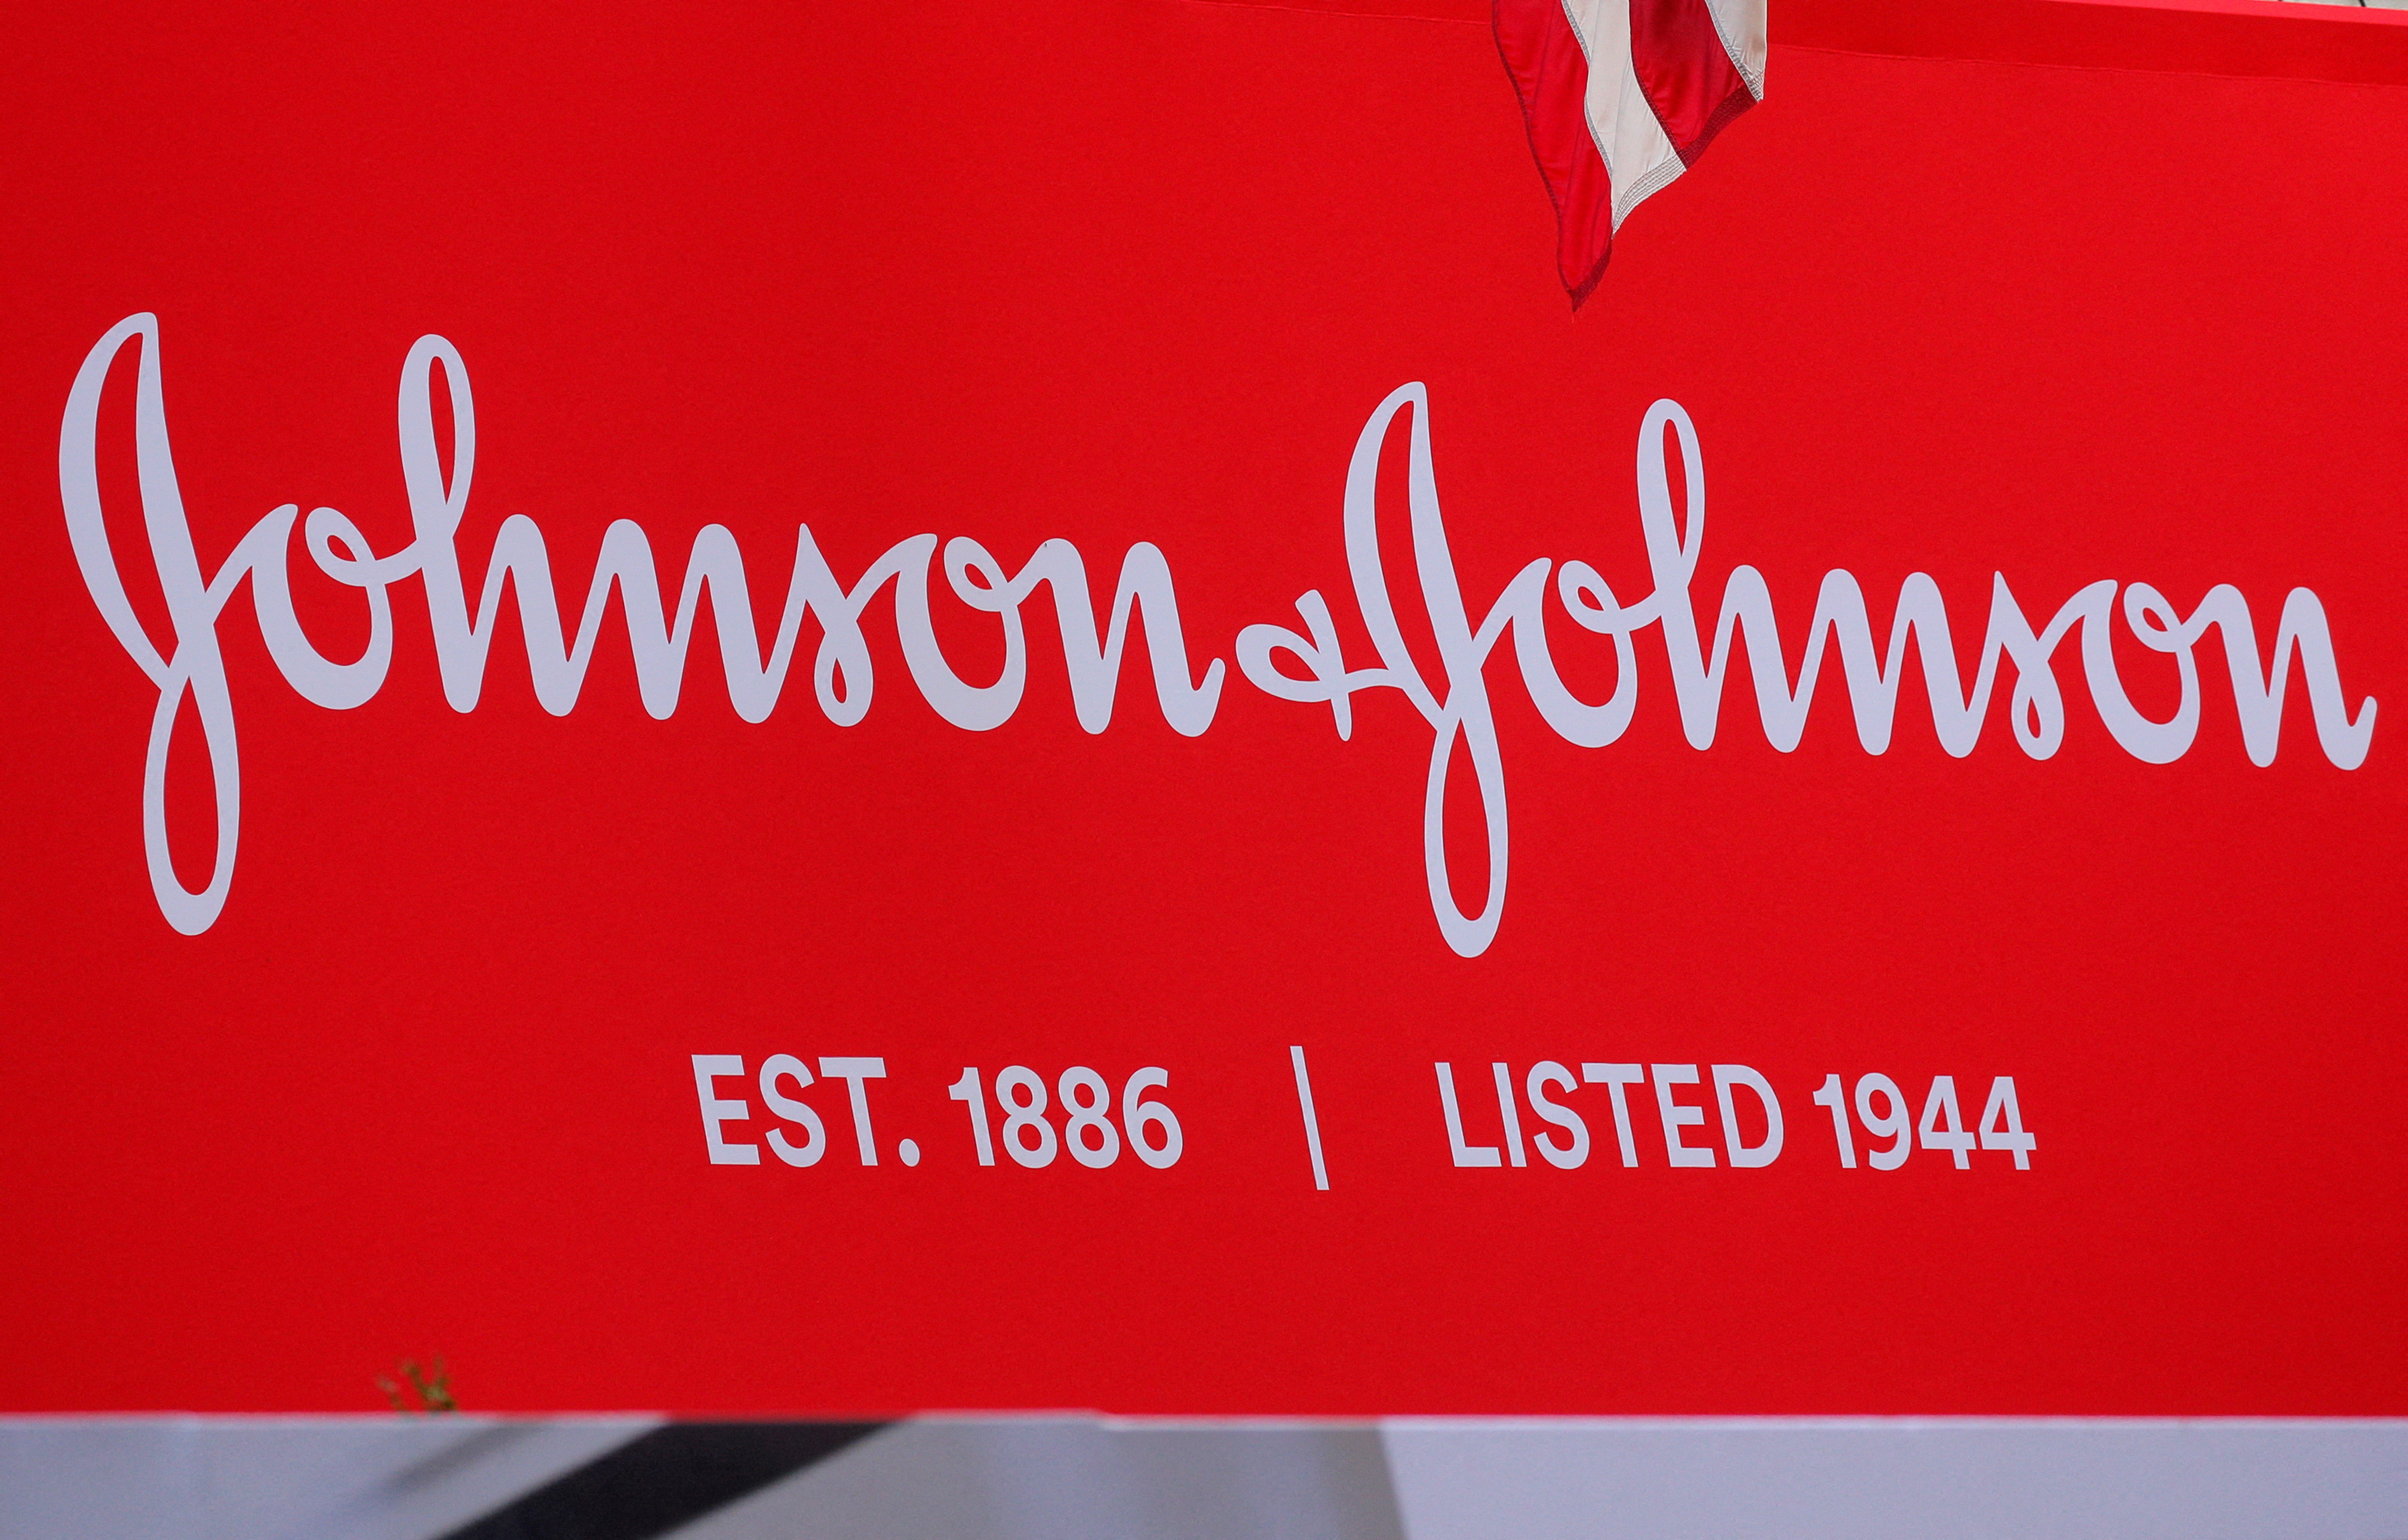 The company logo for Johnson & Johnson is displayed to celebrate the 75th anniversary of the company's listing at the NYSE in New York